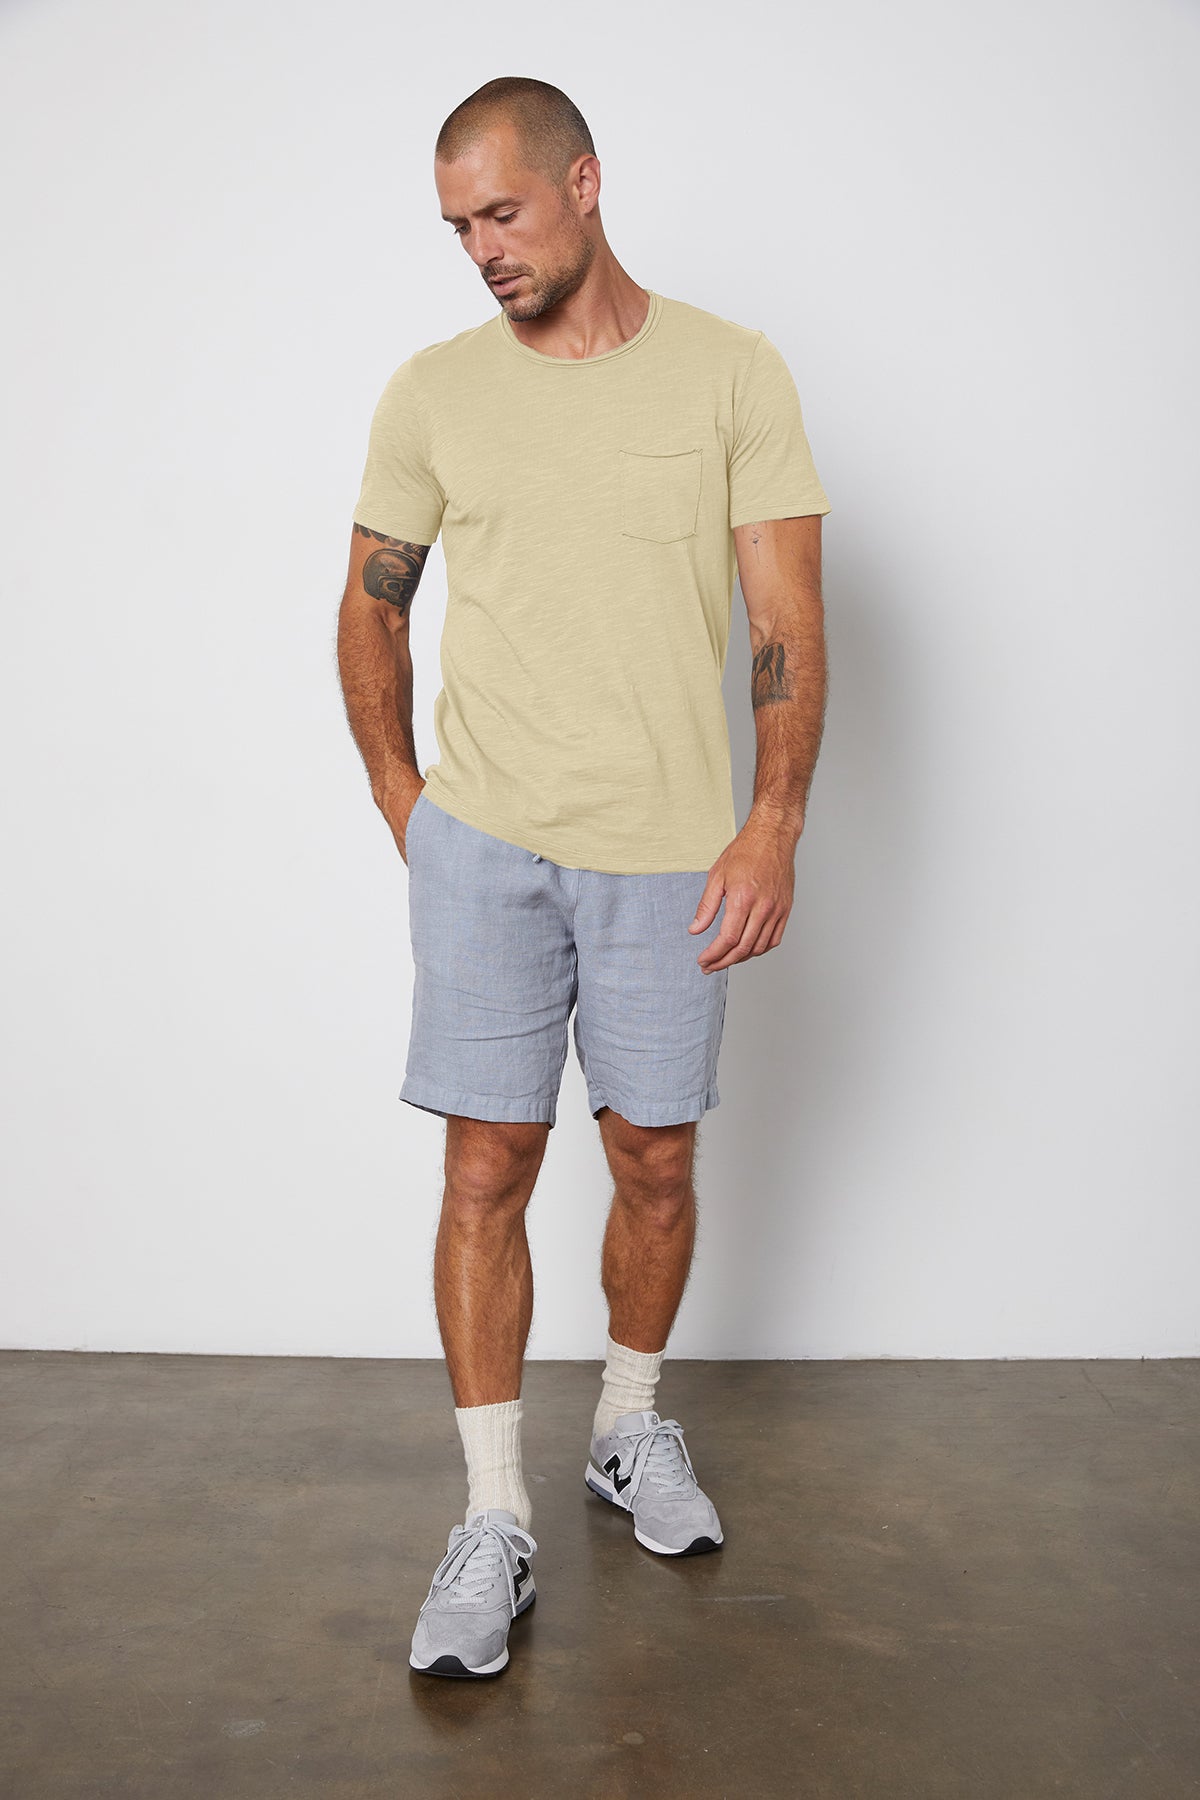   Chad Raw Edge Cotton Slub Pocket Tee in Olivine with Jonathan shorts in chambray front 